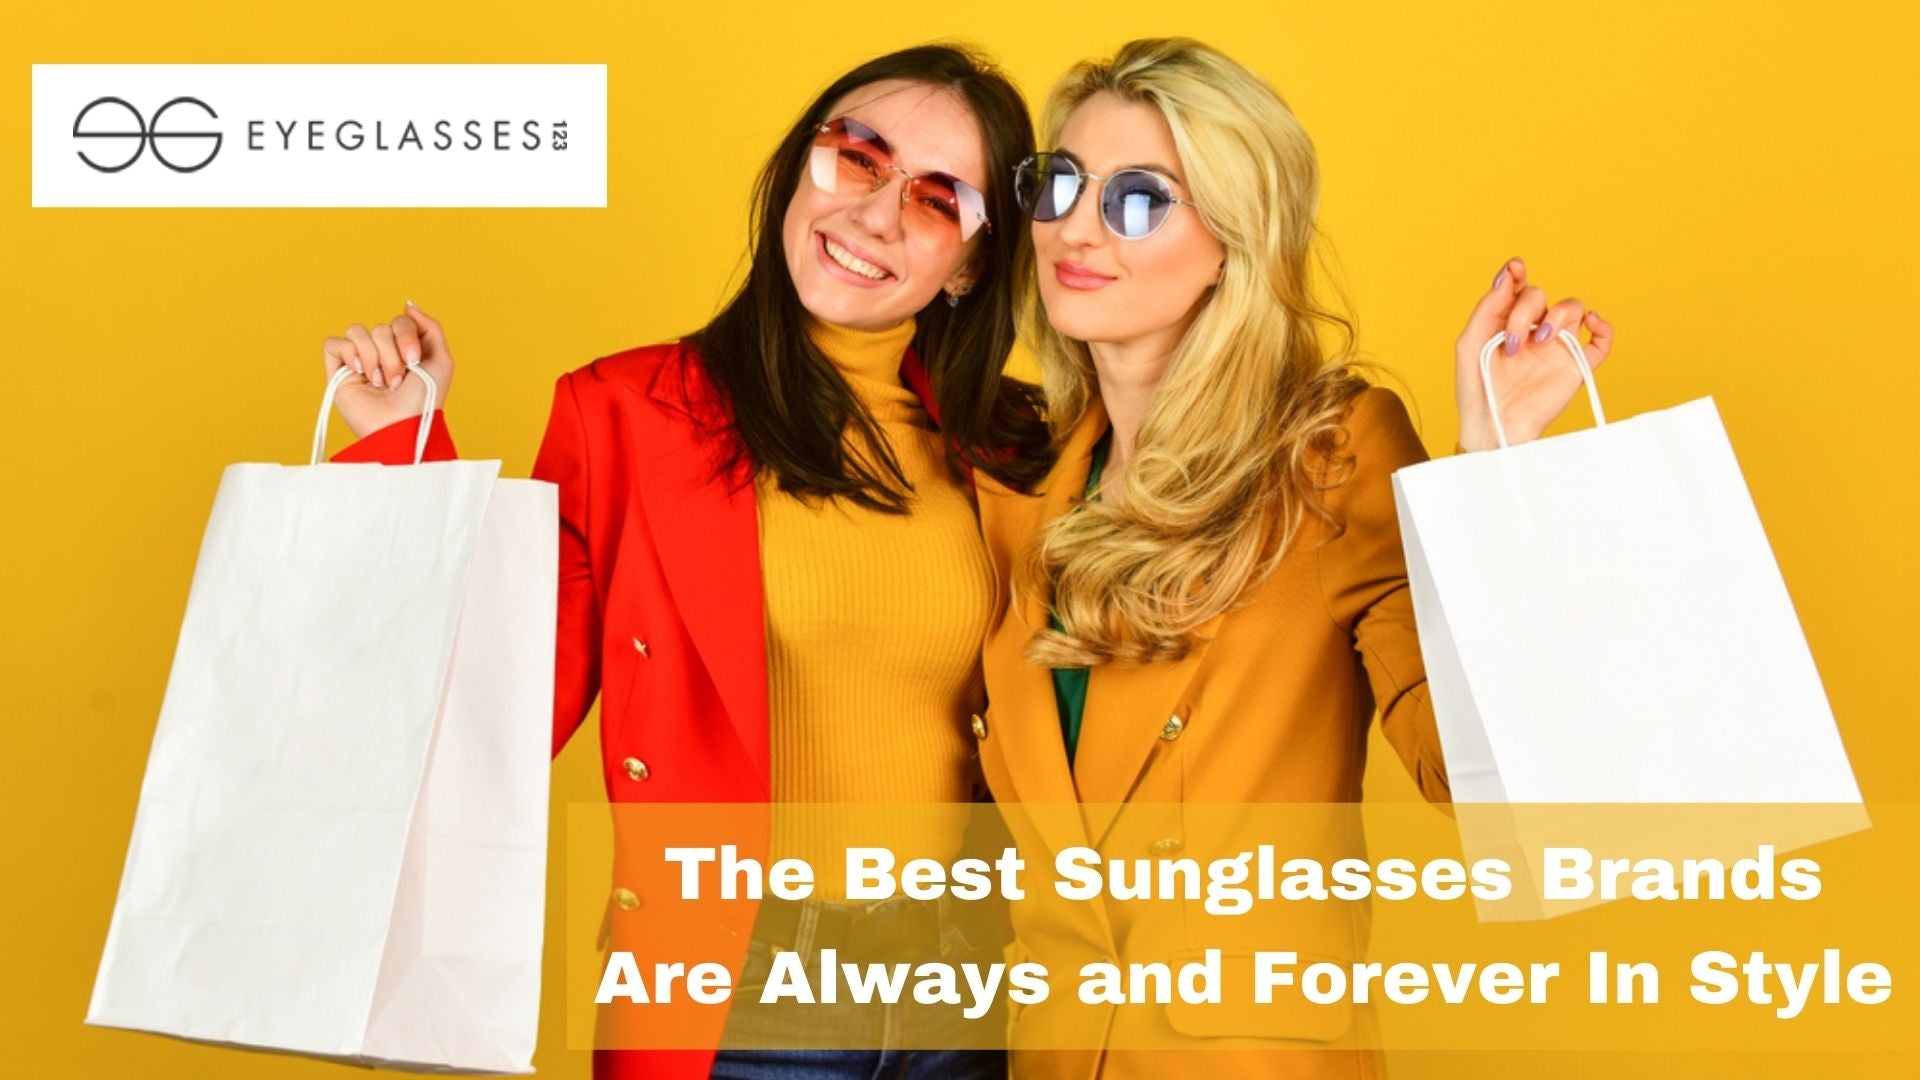 The Best Sunglasses Brands Are Always and Forever In Style